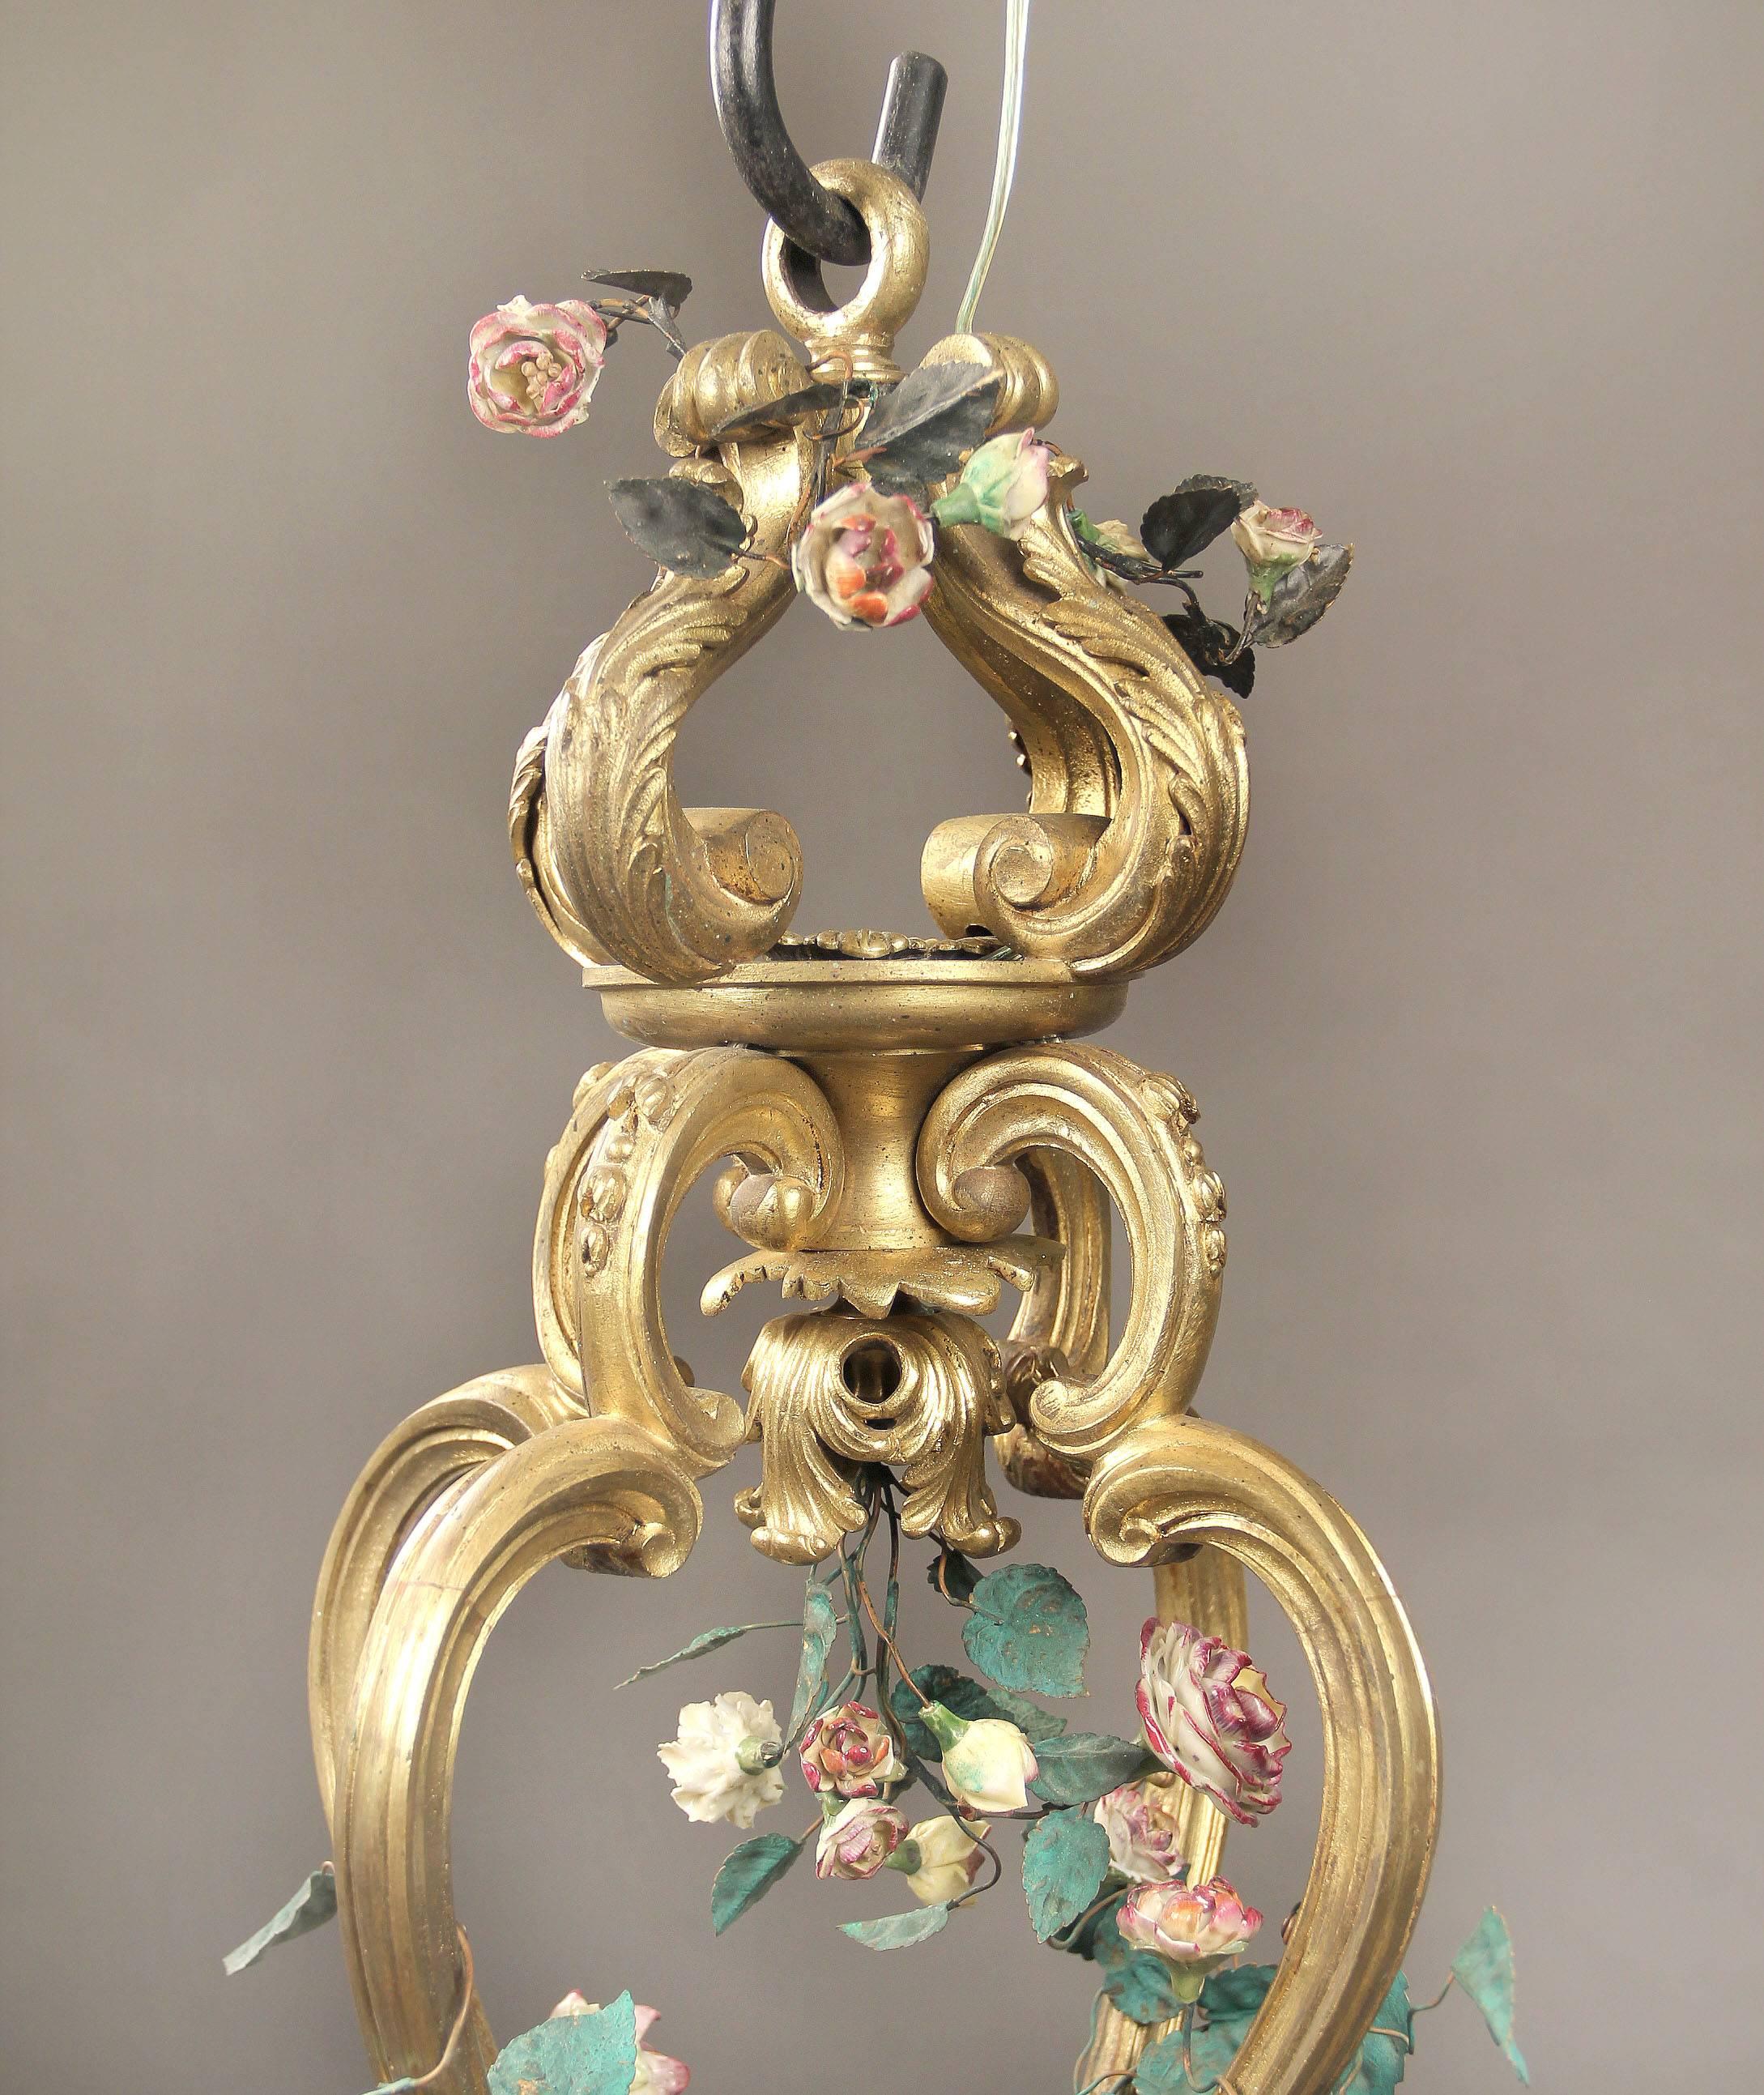 A late 19th century gilt bronze and French porcelain Rococo Revival eight light chandelier porcelain flowers and leaves drape the bronze frame with pink and yellow roses covering the eight perimeter lights. If you are looking for a chandelier, a